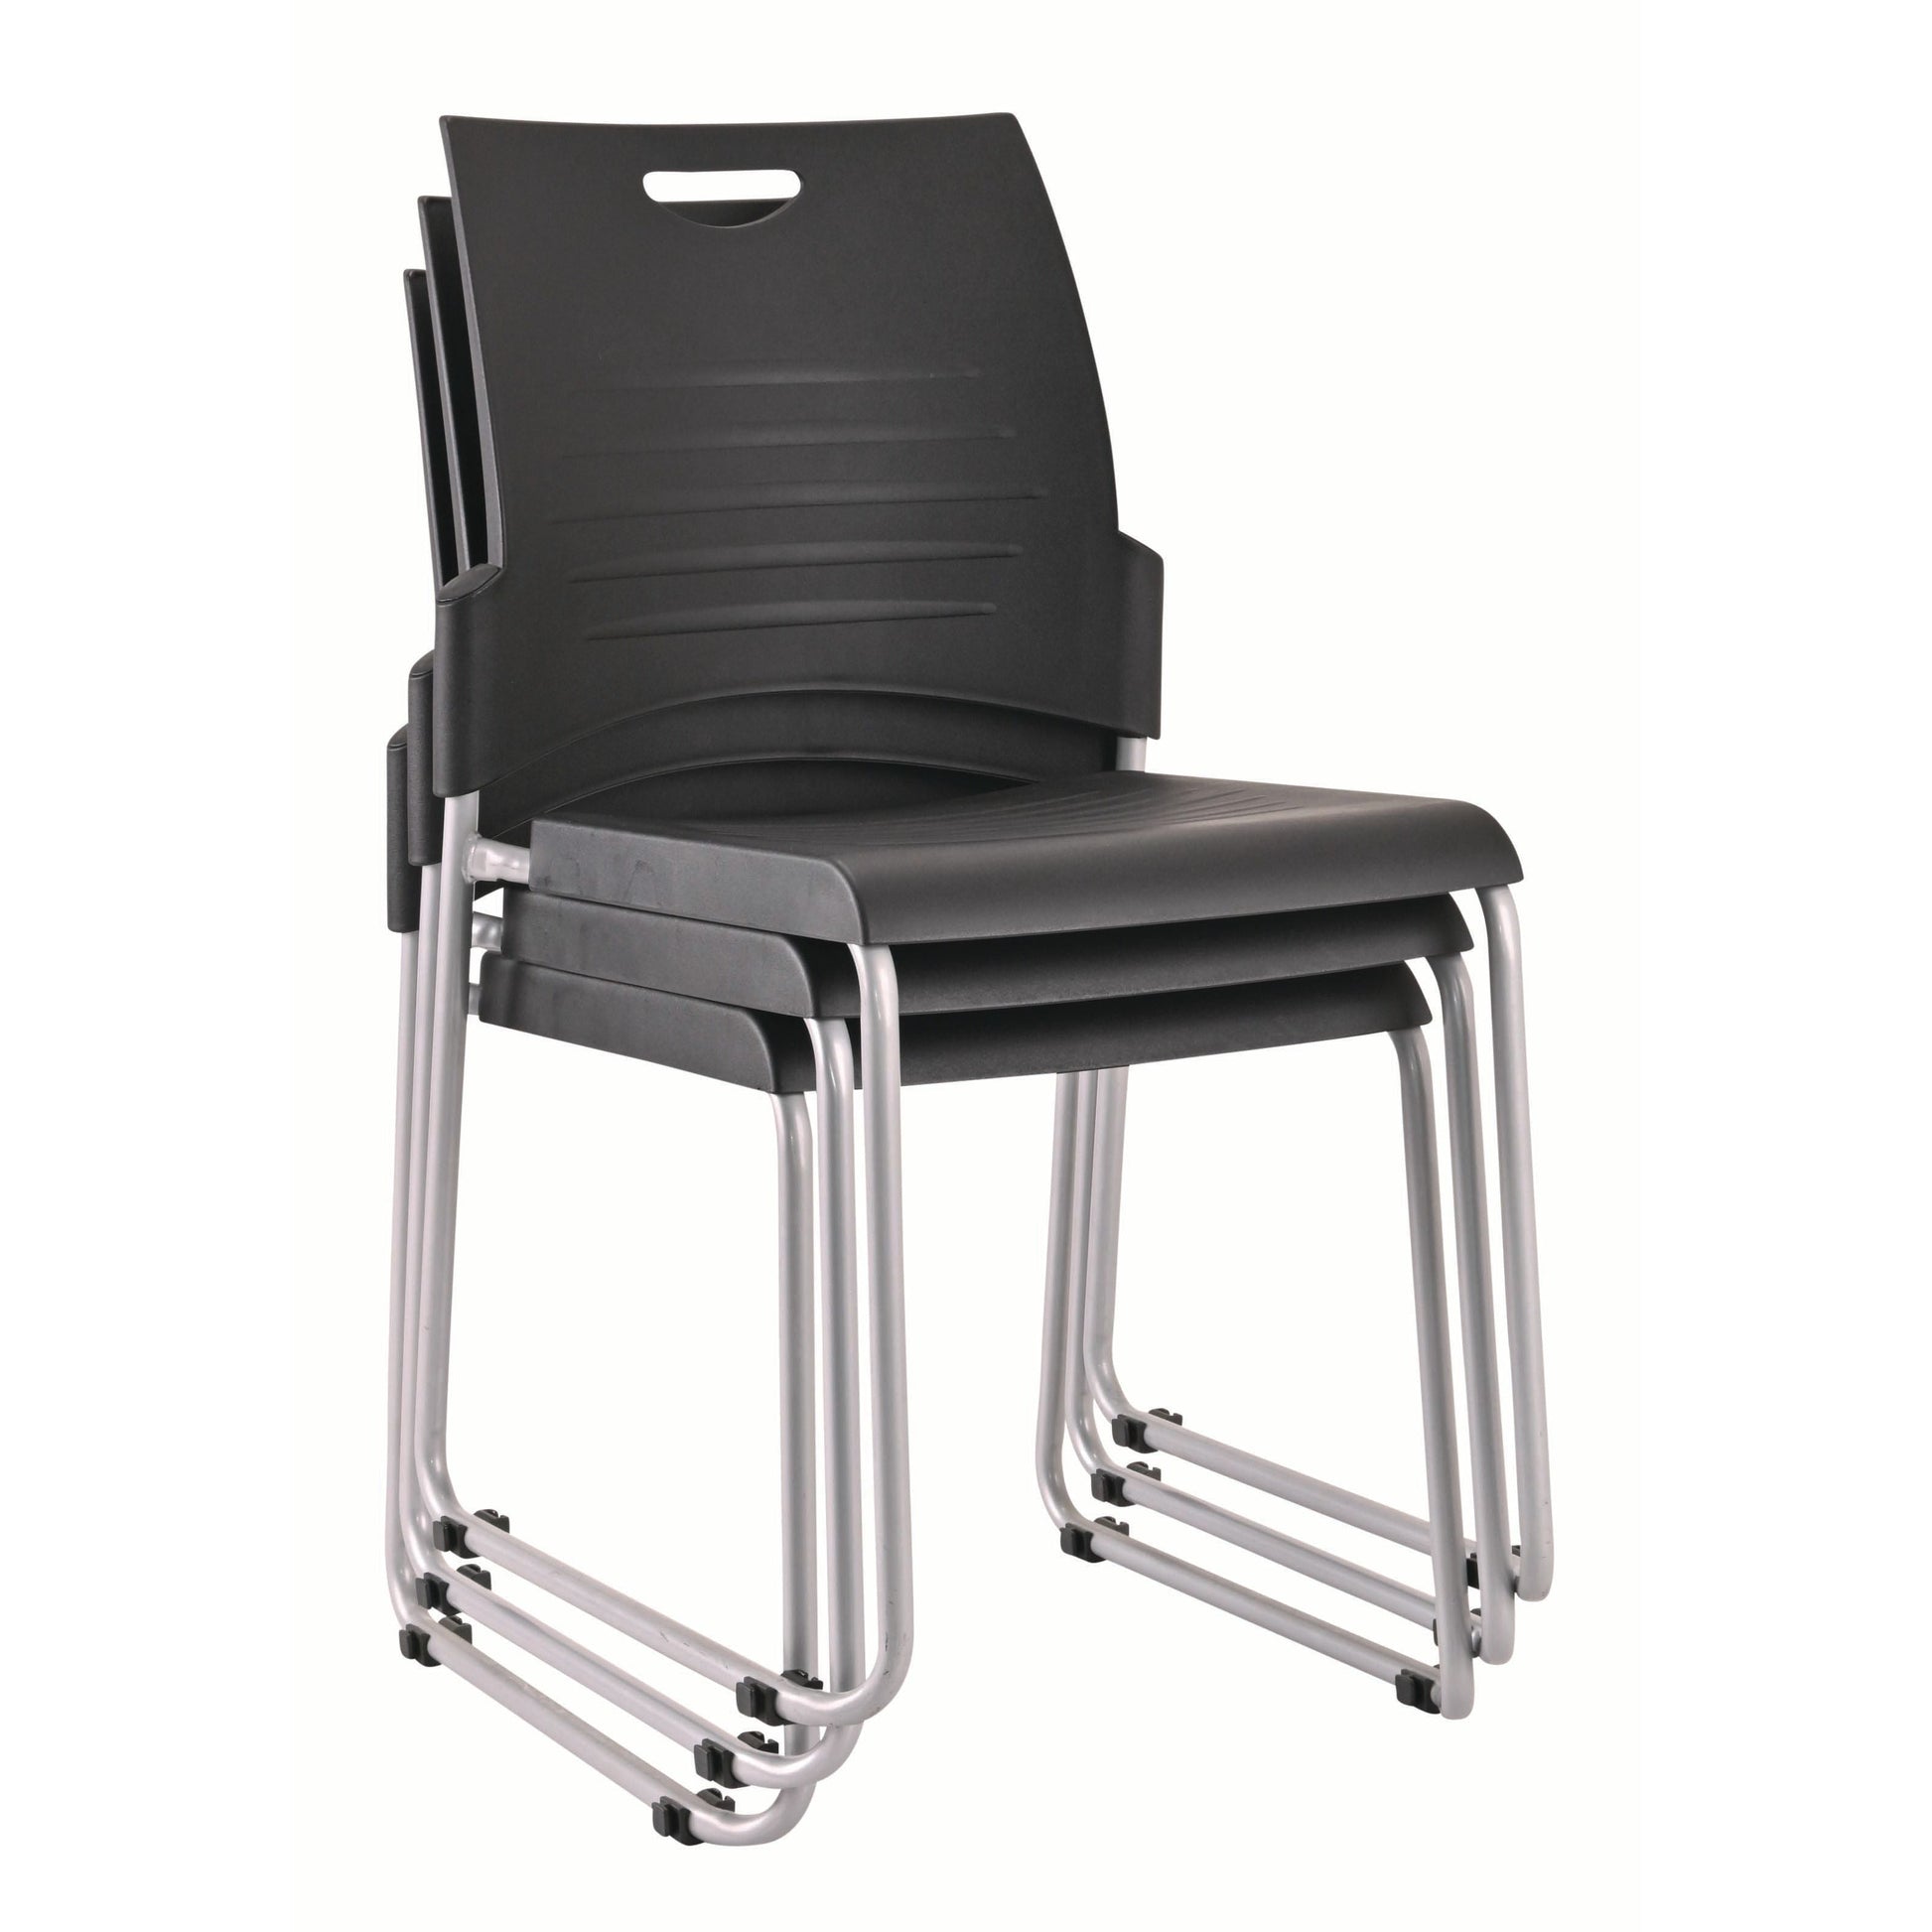 Pronto – Skid Base-Office Chairs-Smart Office Furniture